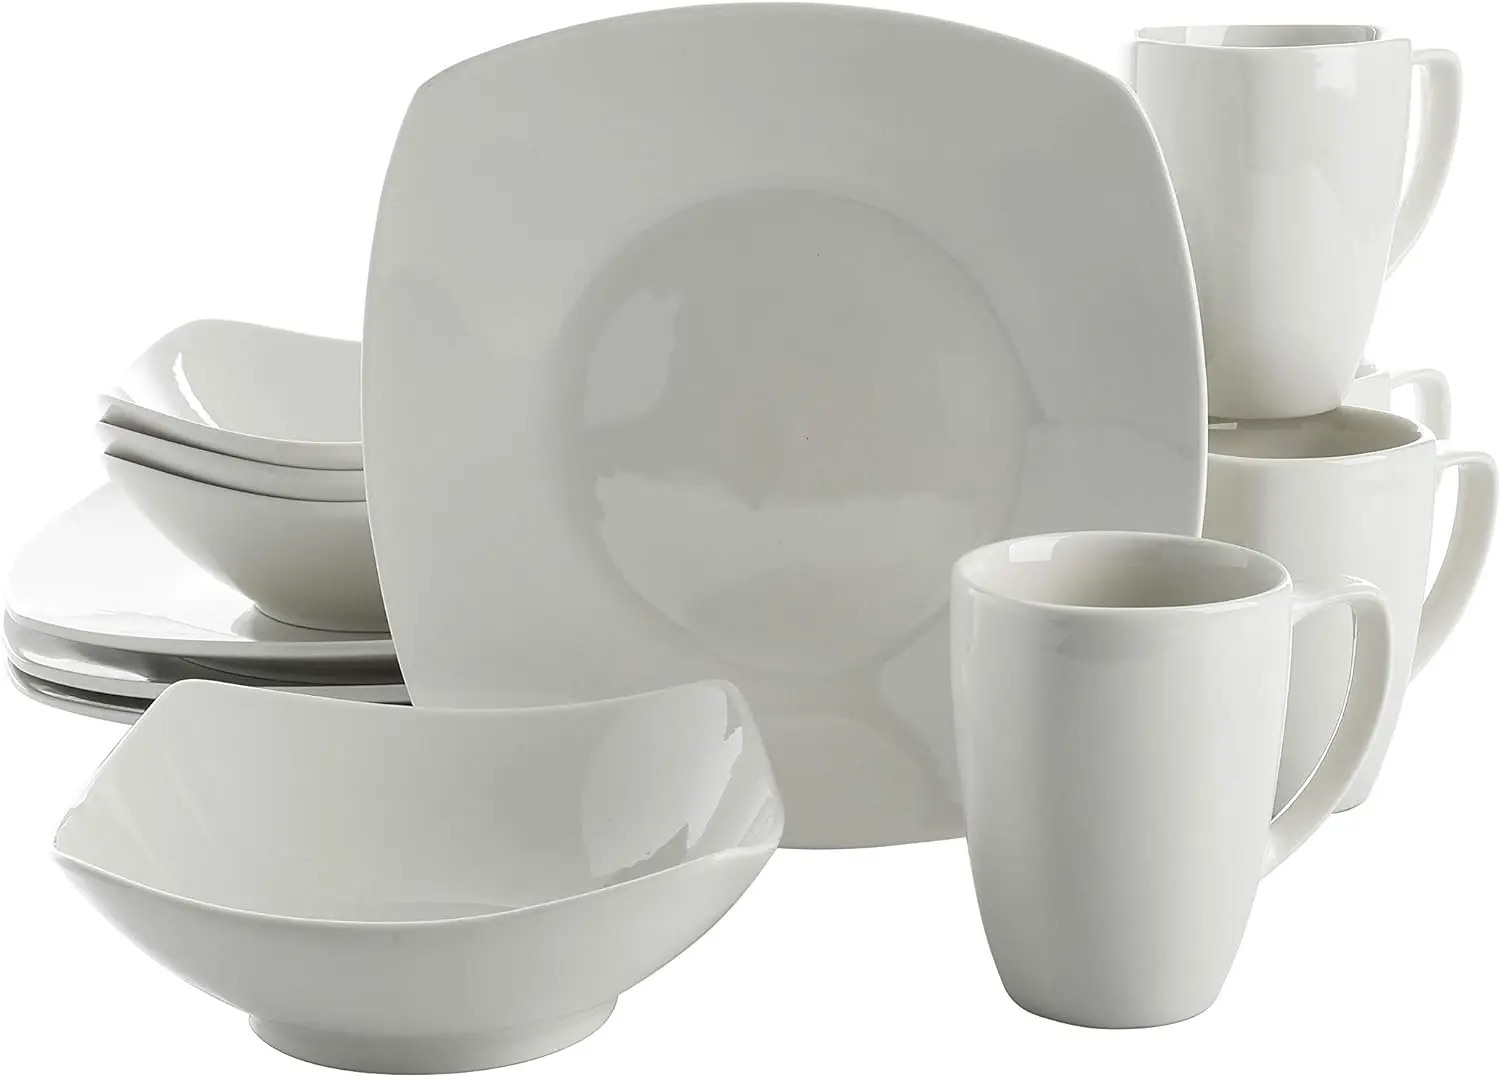 

Gibson Home Amelia Court Porcelain Chip and Scratch Resistant Dinnerware set, Service for 4 (12pcs), White (Soft Square)